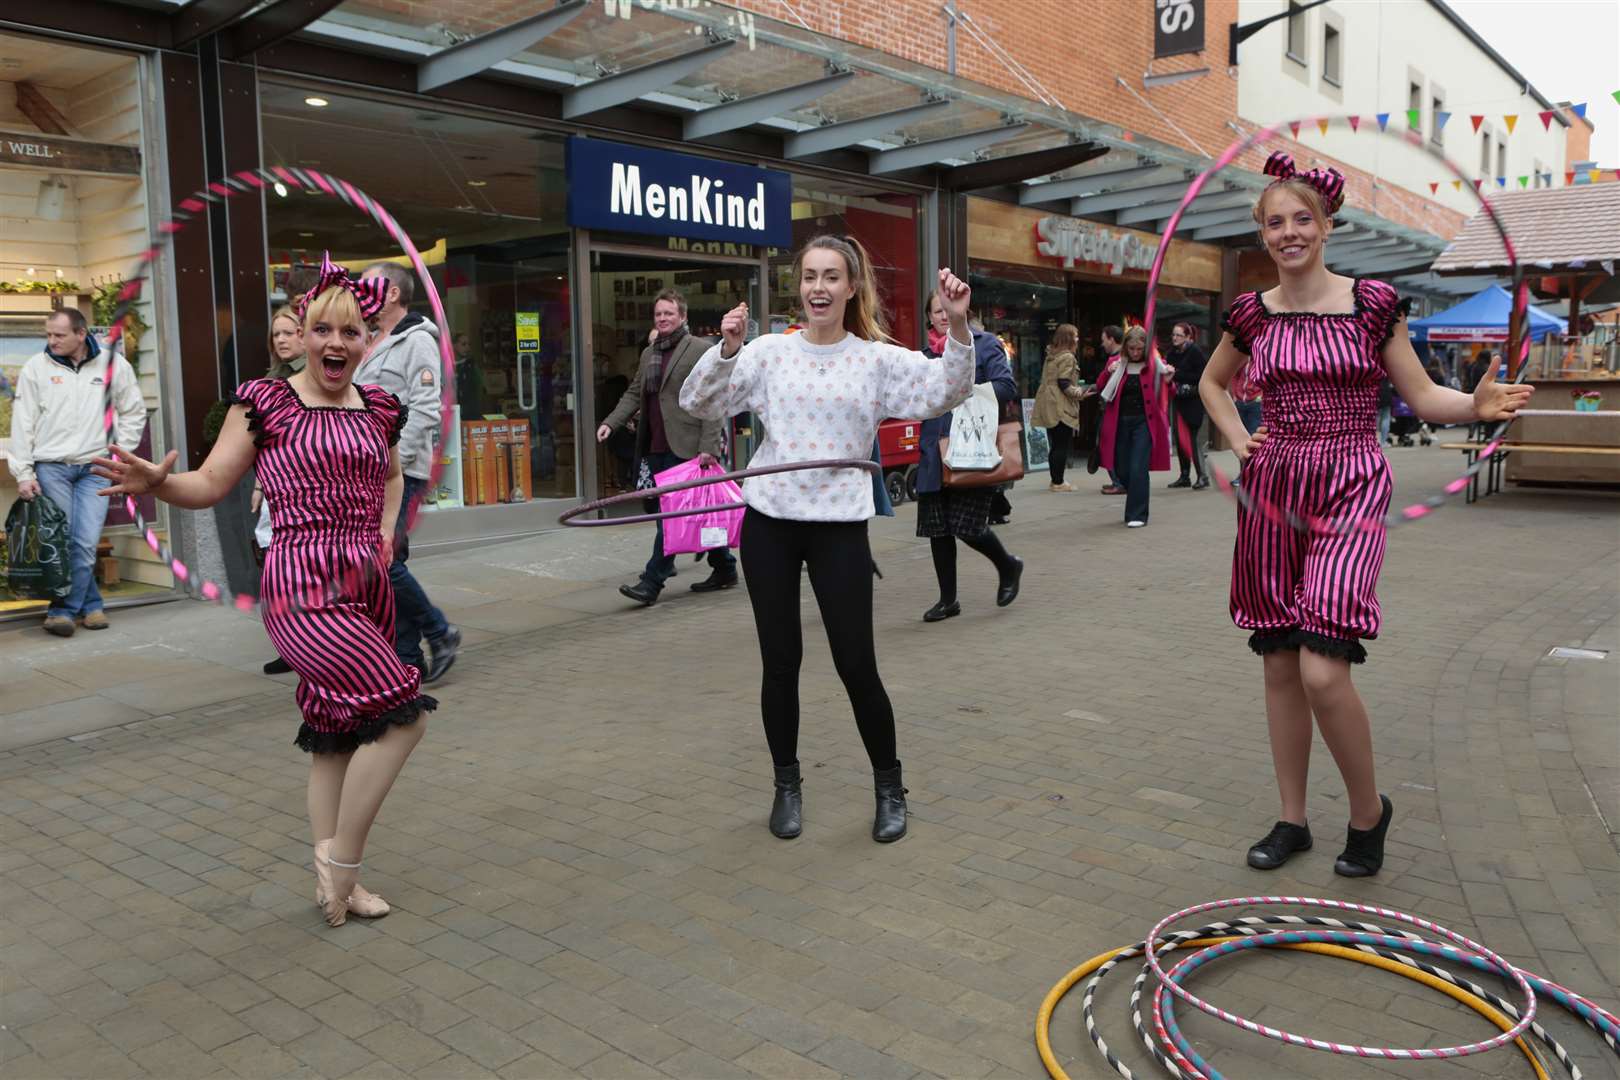 Hobbit and Tilly of the Pantaloonies show kmfm's Emma Jo how to hula hoop. Picture: Martin Apps